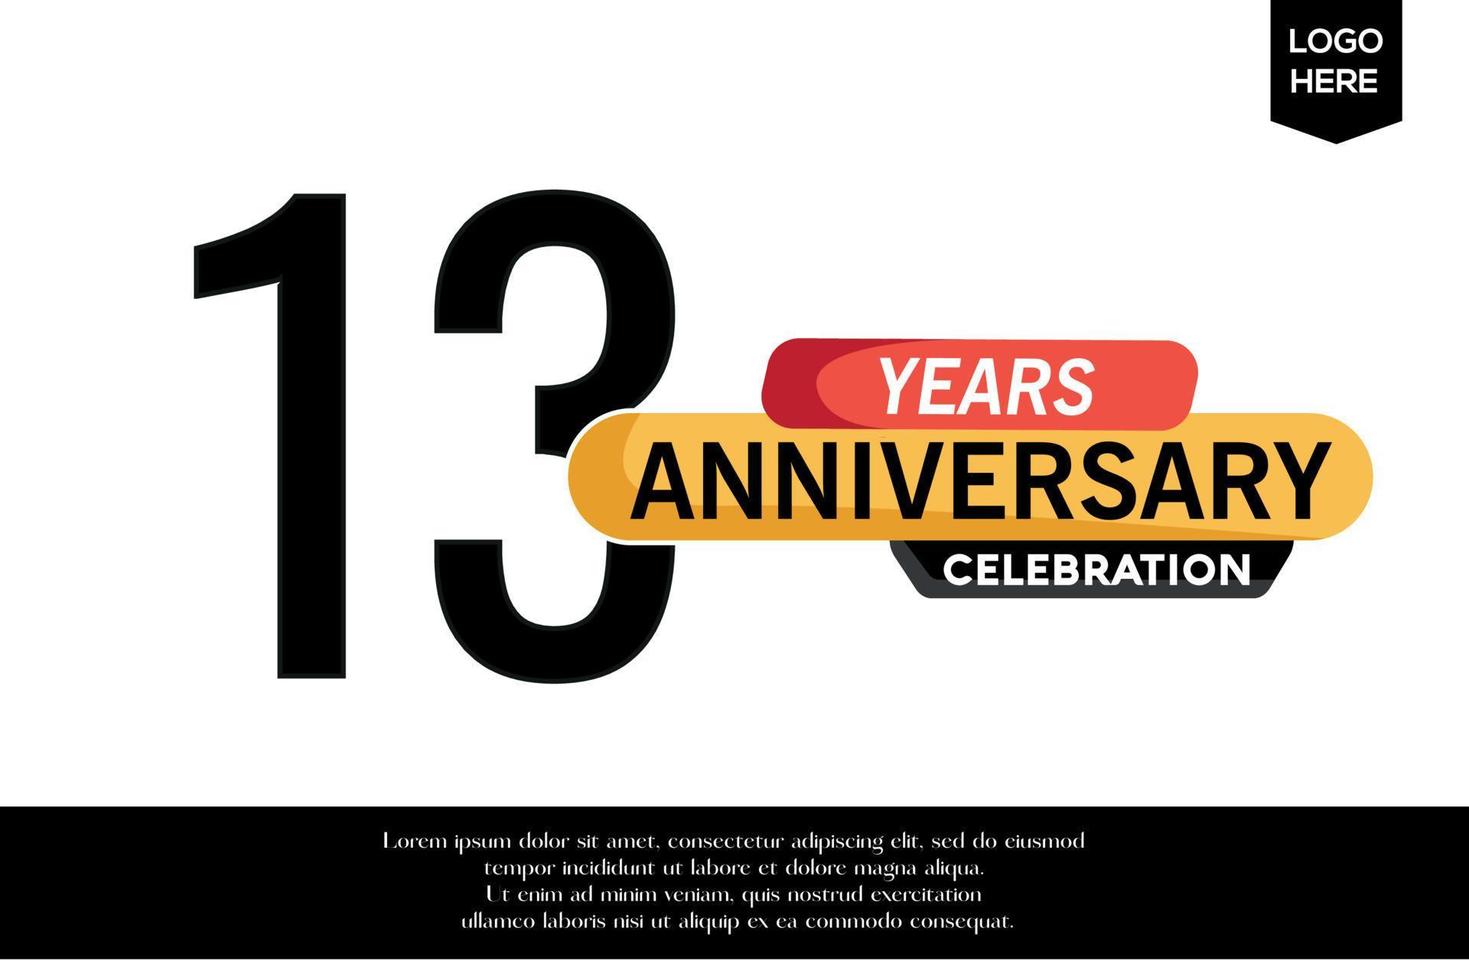 13th anniversary celebration logotype black yellow colored with text in gray color isolated on white background vector template design